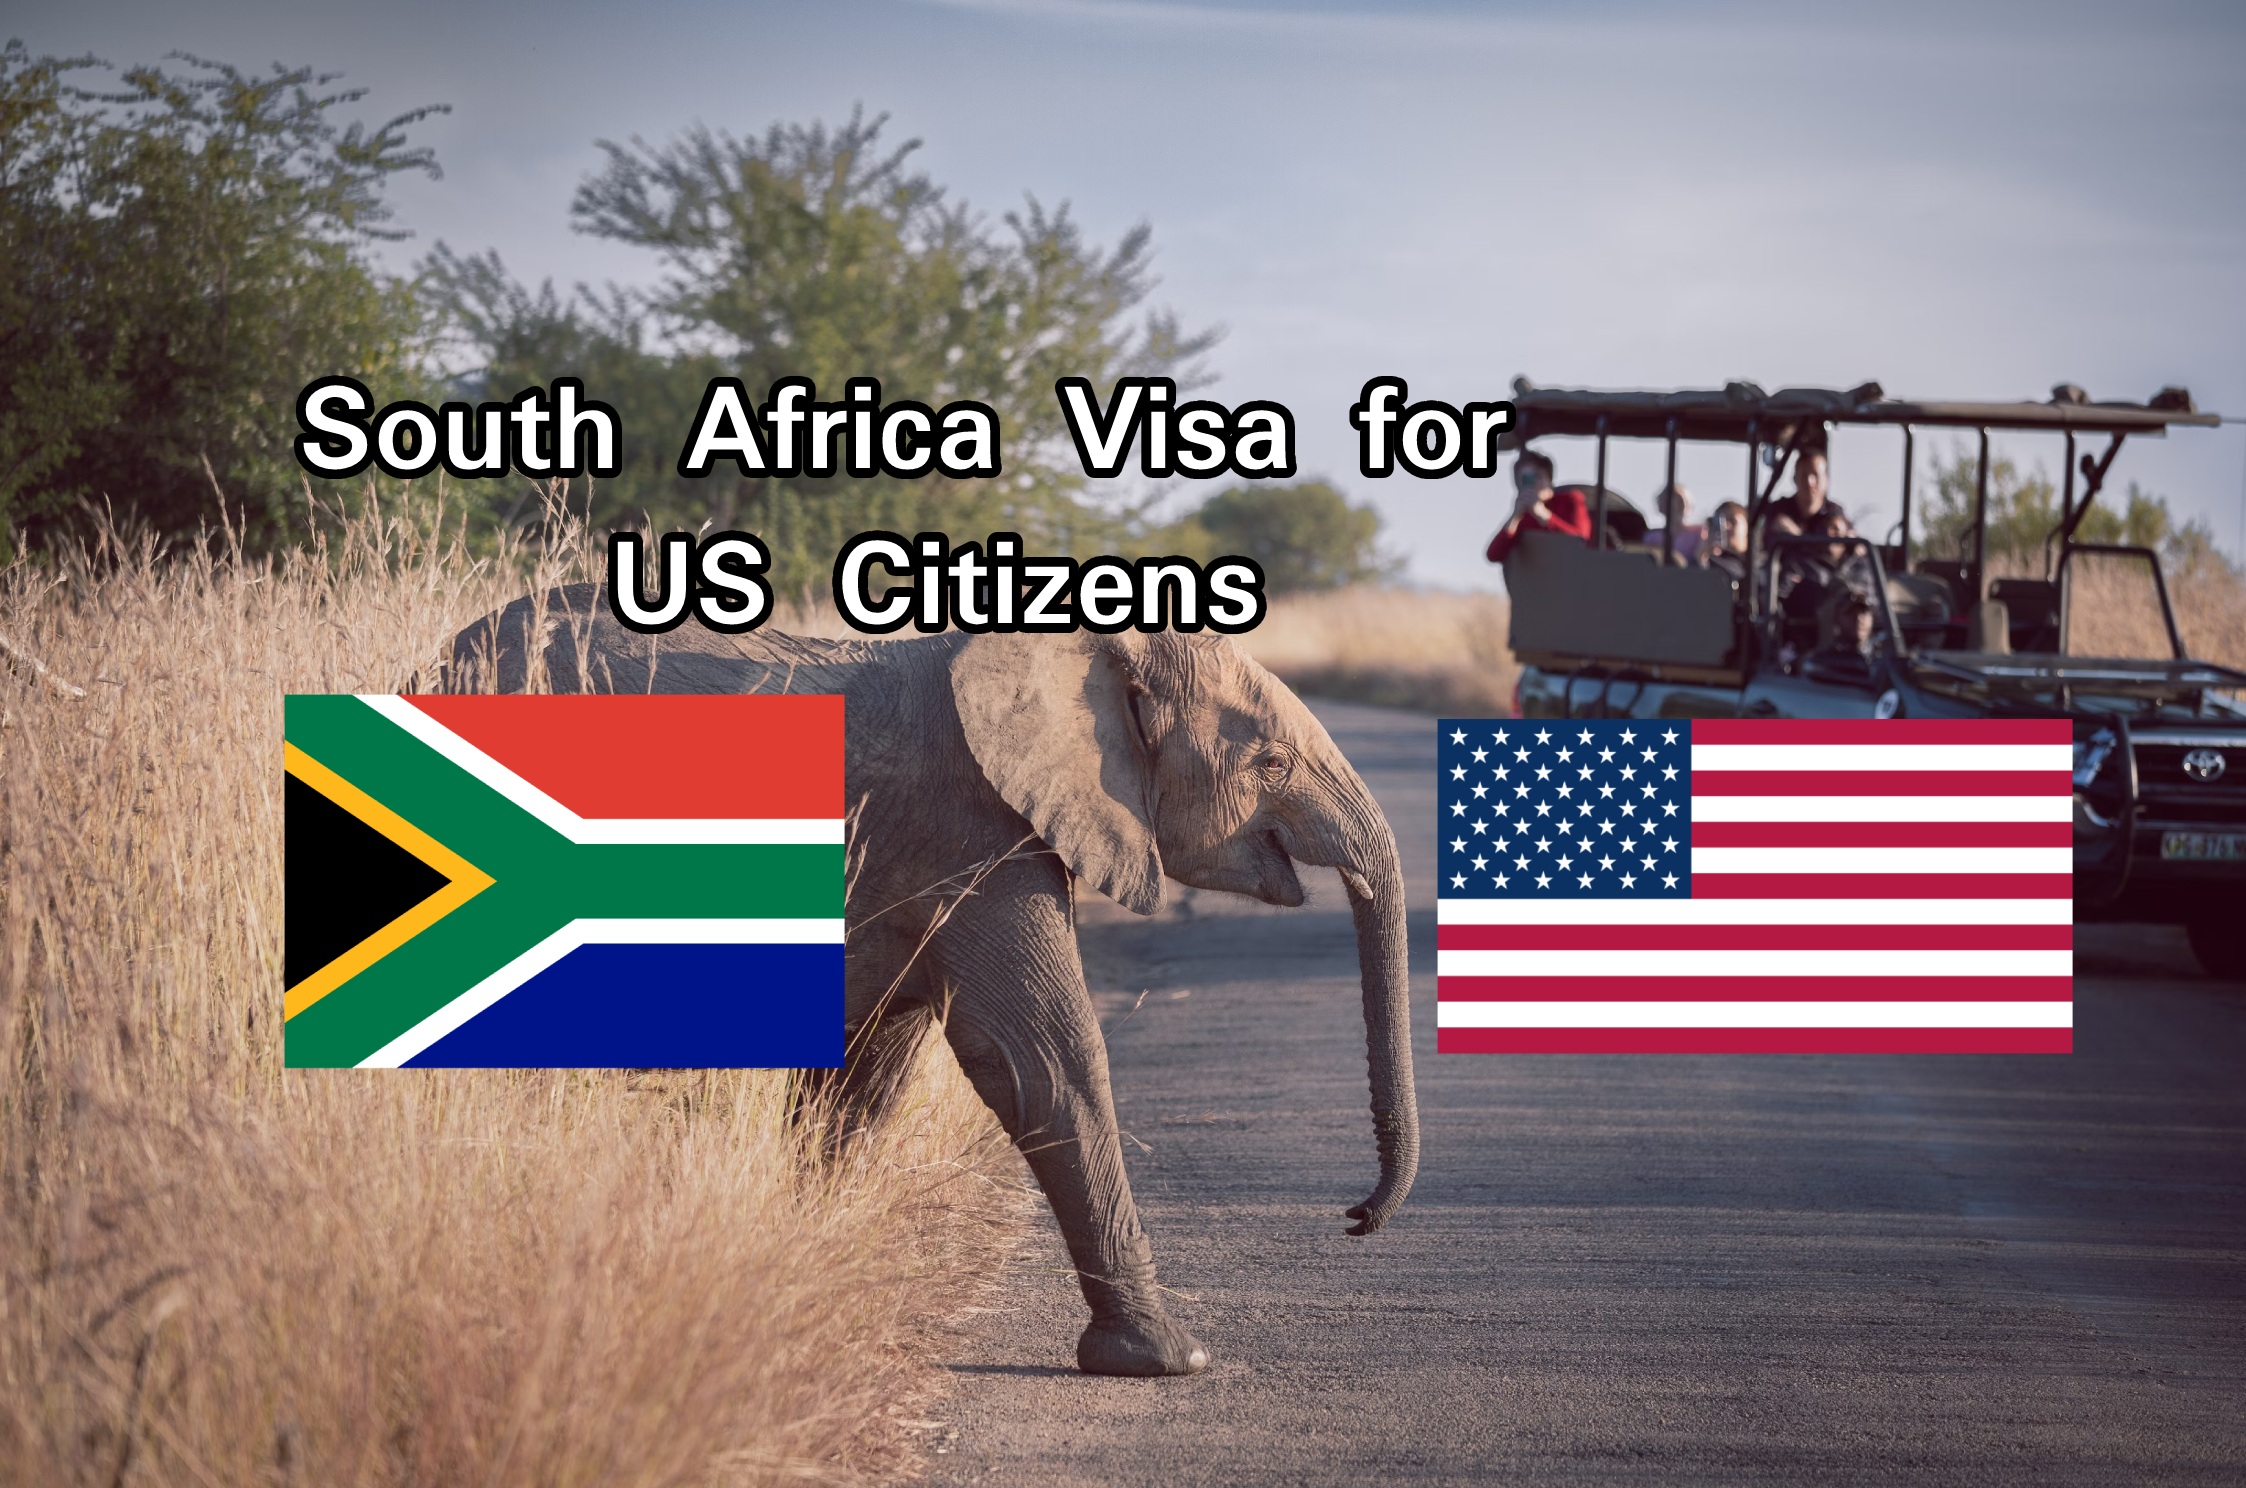 South Africa visa for US Citizens